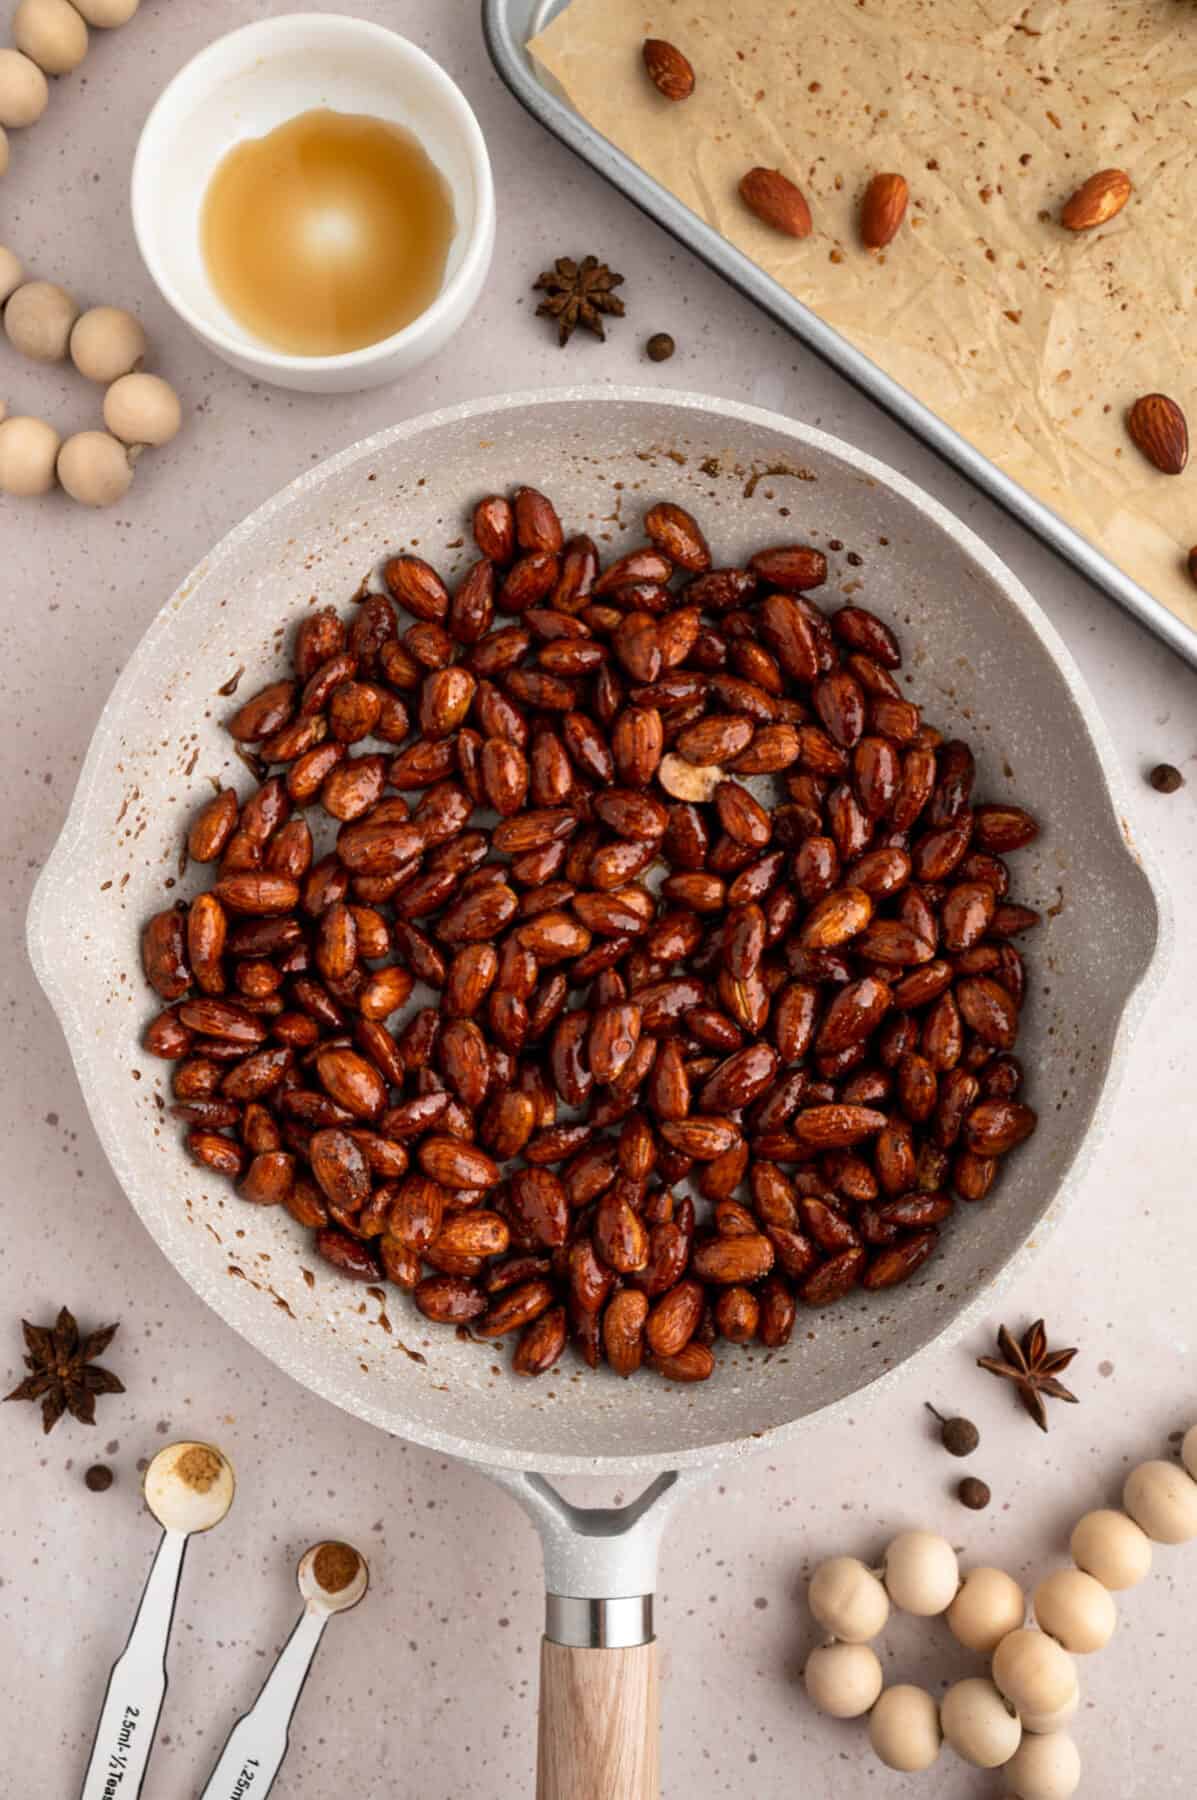 spices and maple syrup over the roasted almonds in a skillet.